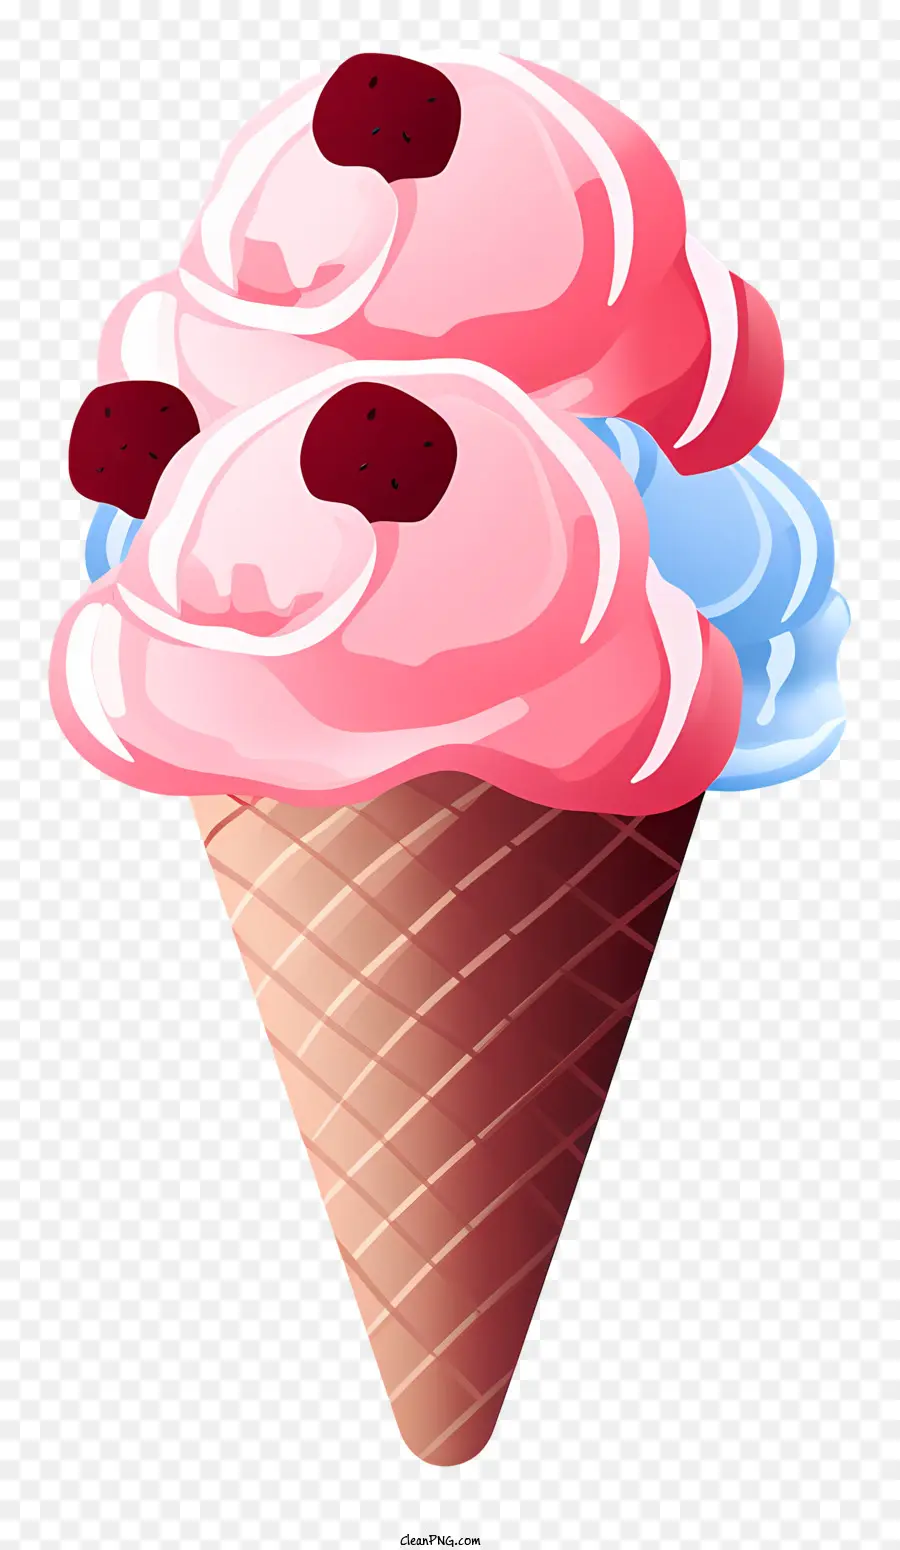 pink ice cream cone raspberry toppings chocolate dip visually appealing ice cream attention-grabbing dessert